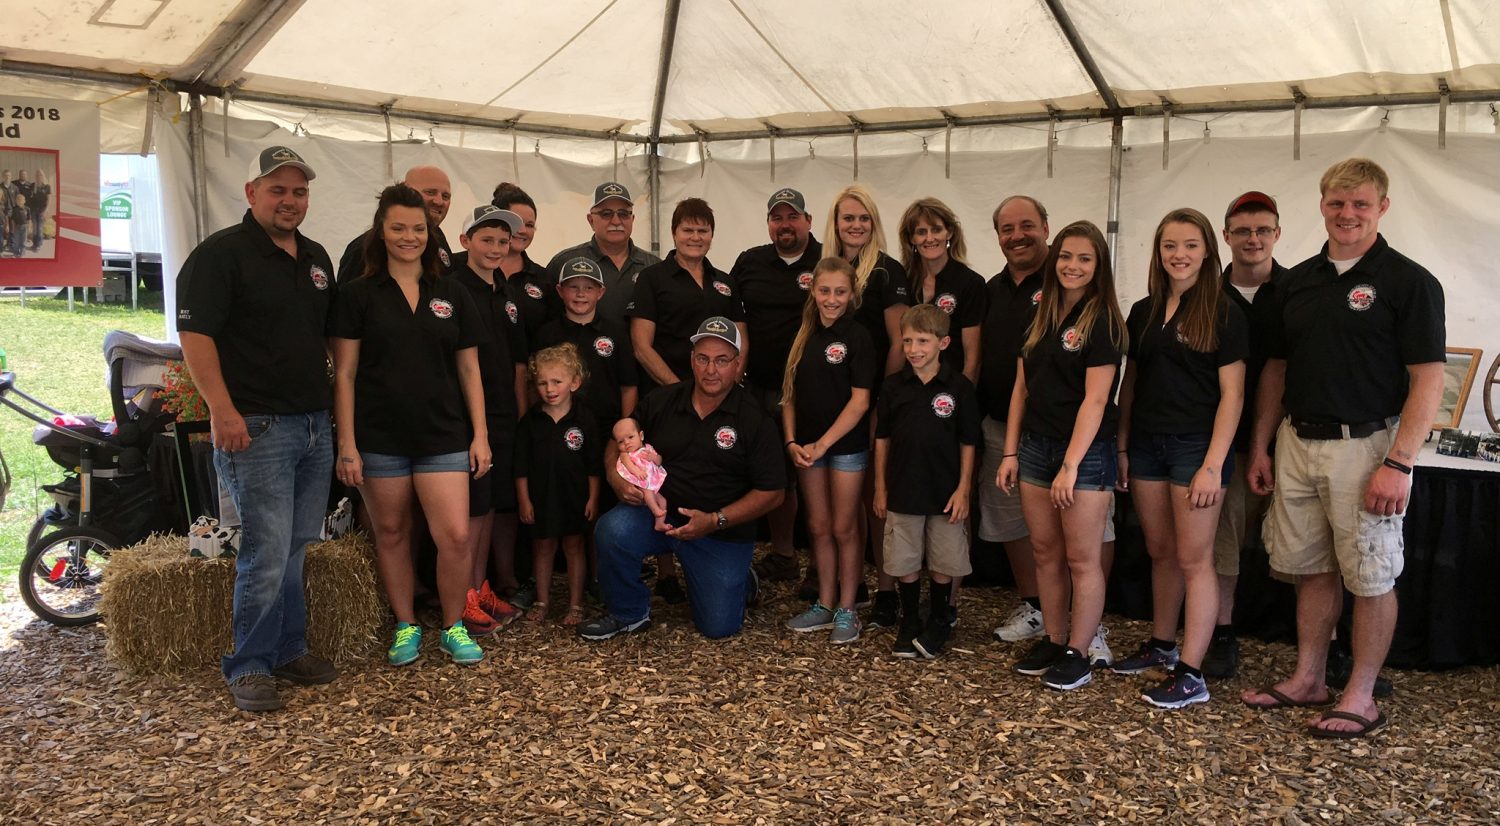 The families of Daryl and Brenda Sternweis, Ken and Joellen Heiman, and Kelvin and Marilyn Heiman attended 2017 Farm Technology Days in Kewaunee County on July 11.